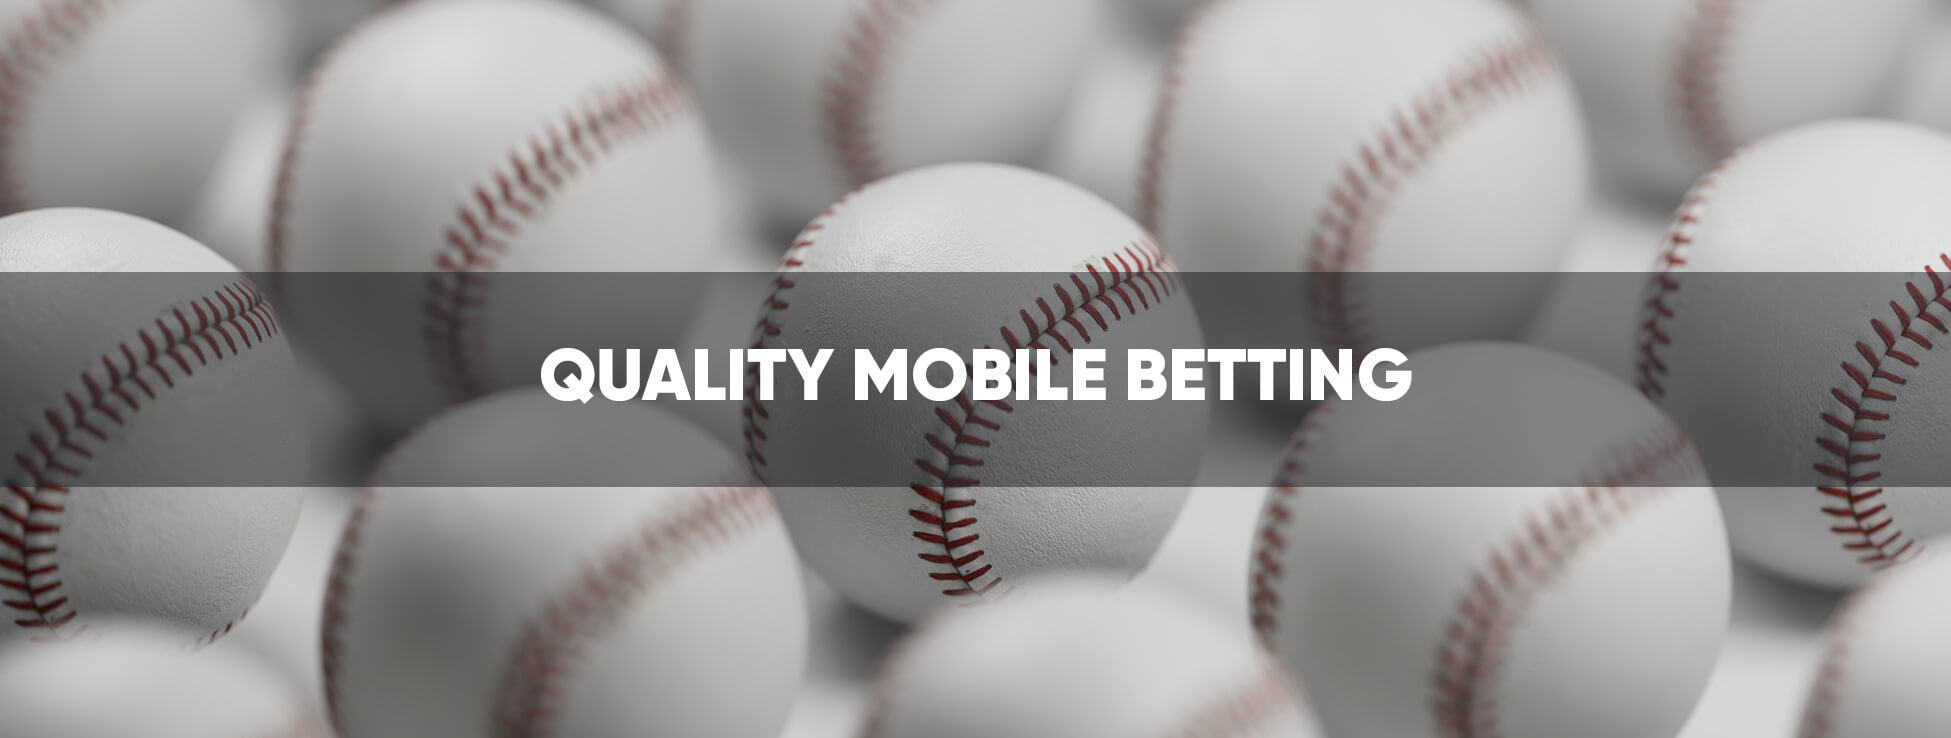 Quality mobile betting